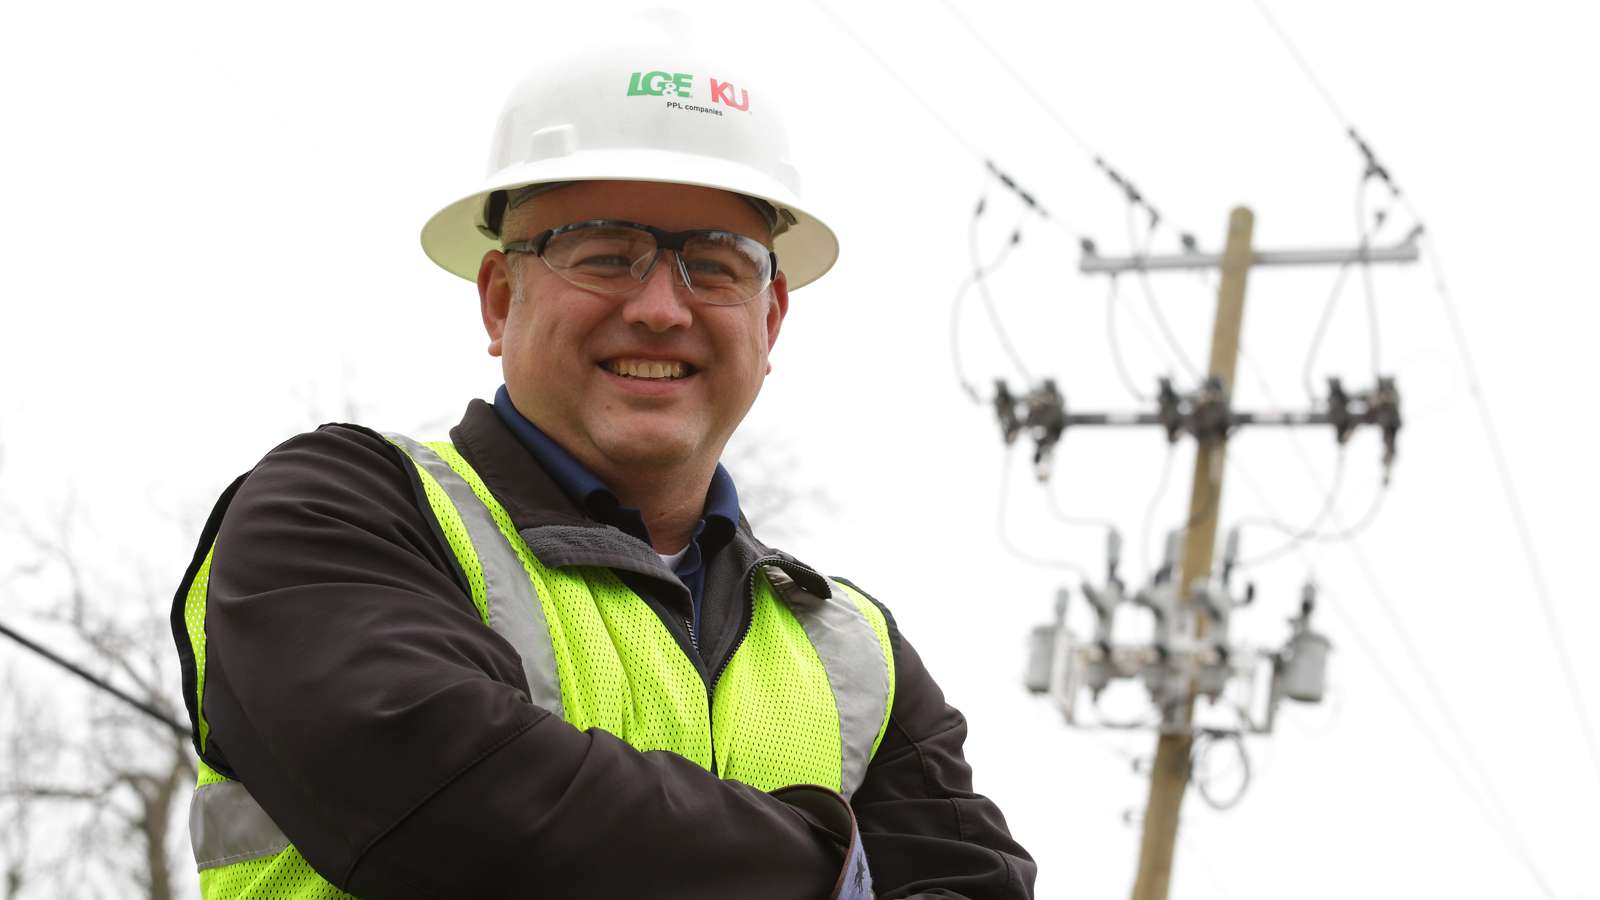 Lineman standing in front of a utility pole with reclosers